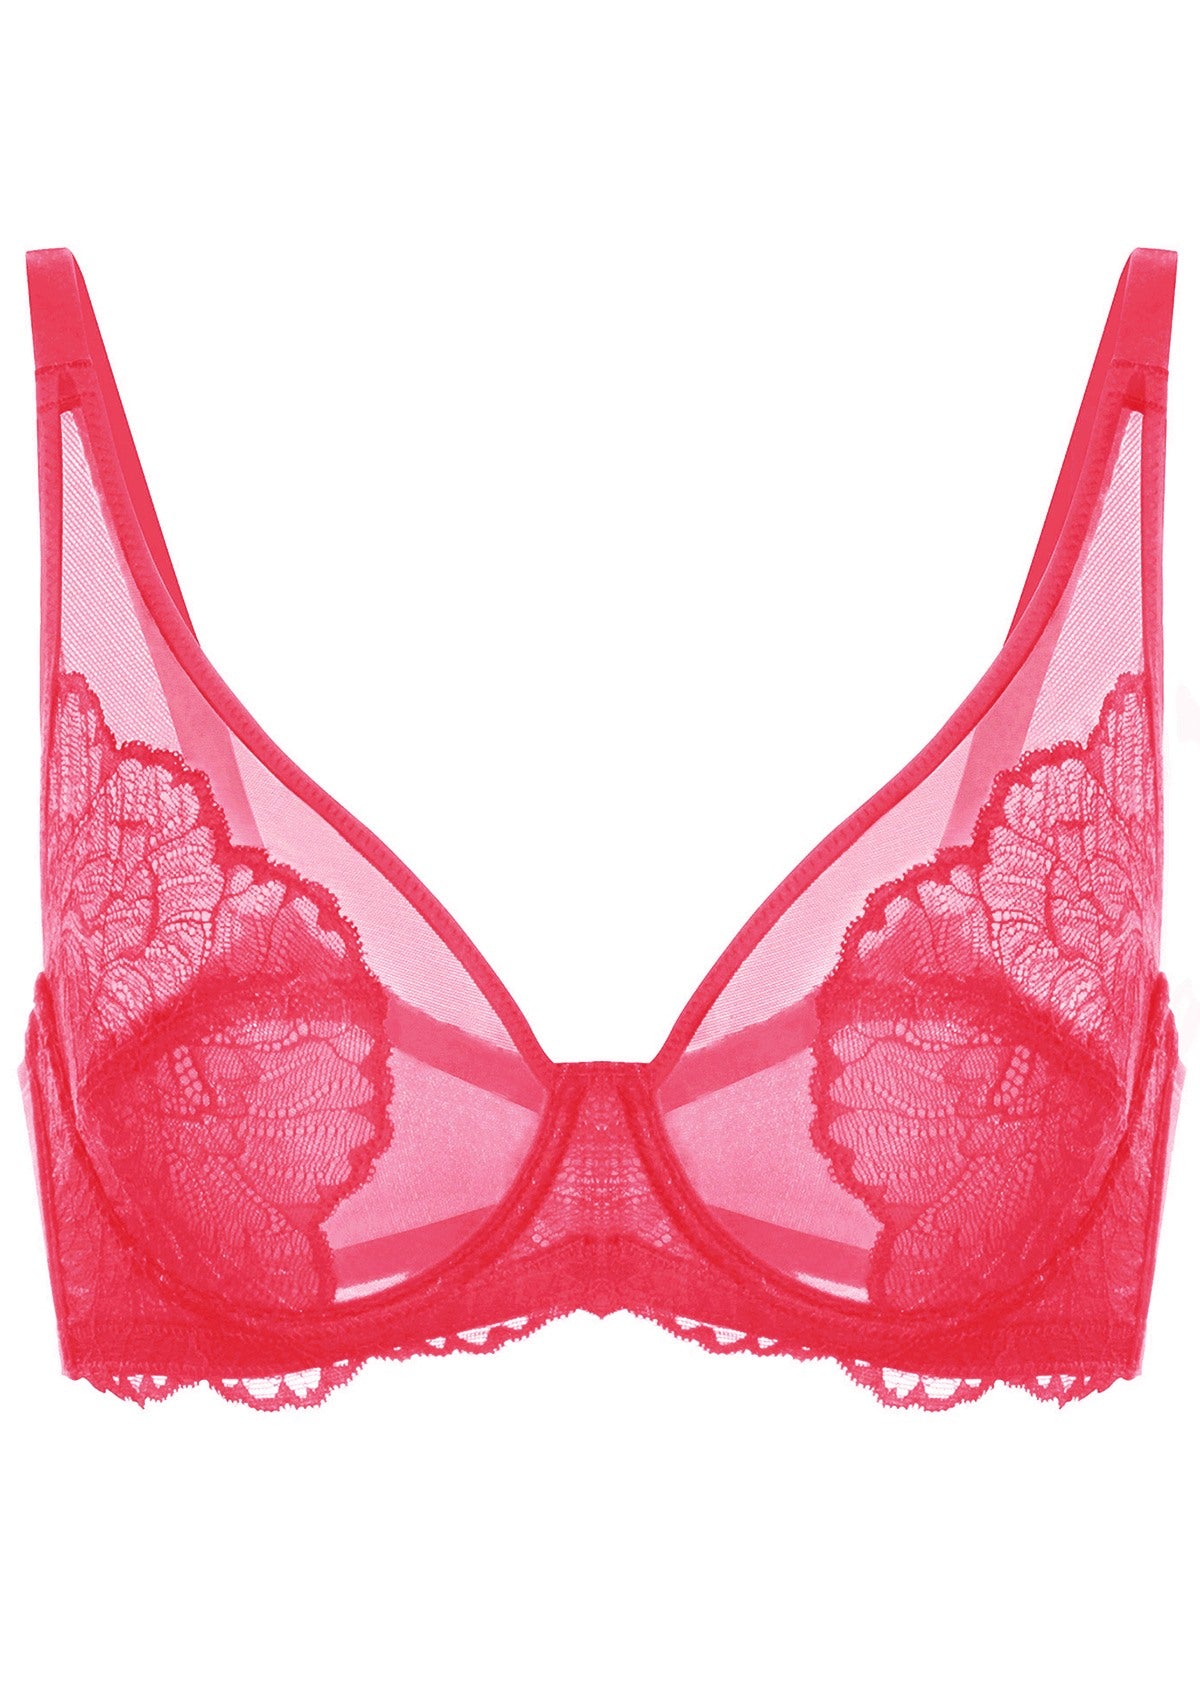 HSIA Blossom Unlined Lace Underwire Bra - Burgundy / 42 / C